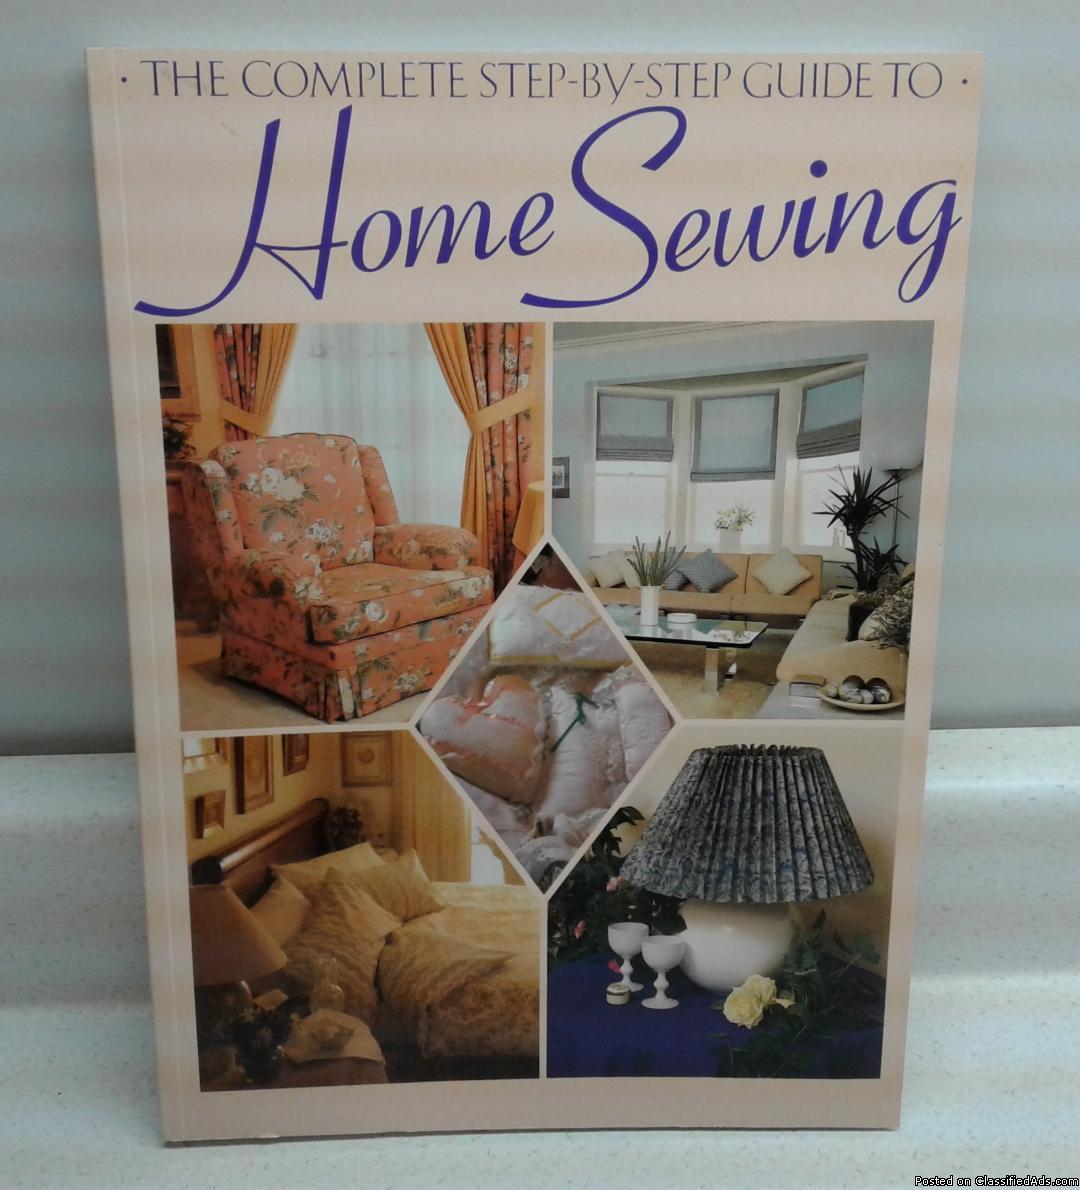 COMPLETE STEP BY STEP GUIDE TO HOME SEWING